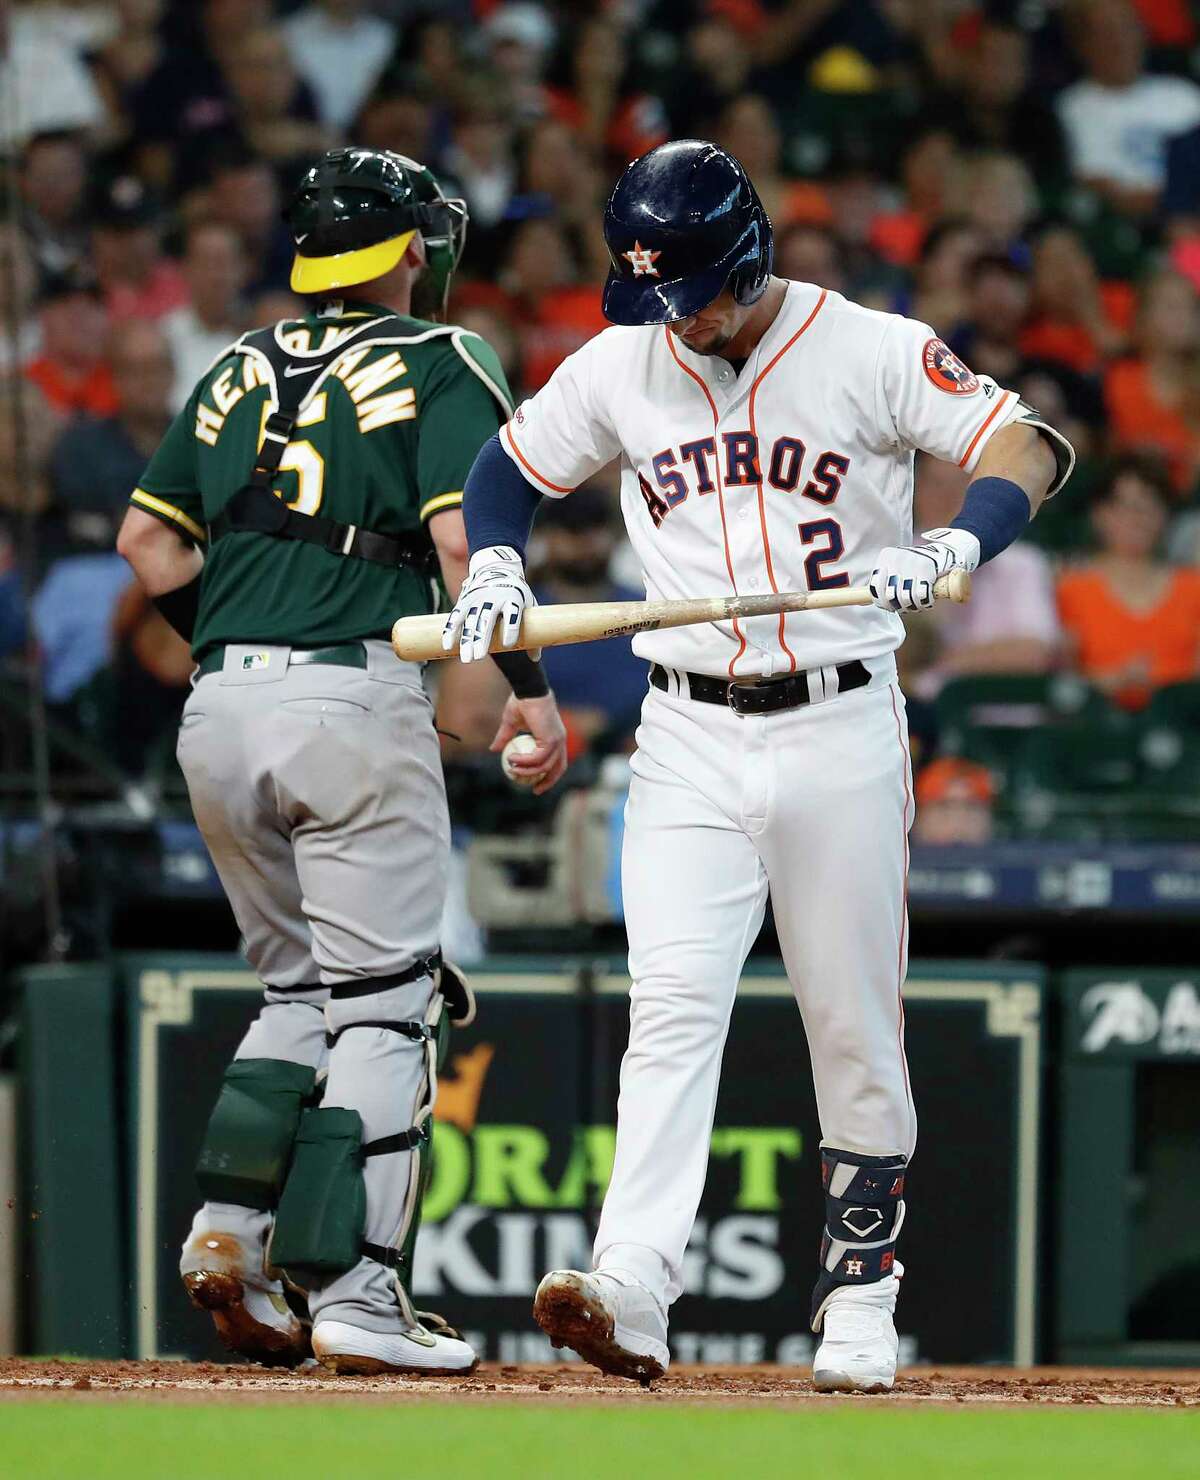 Houston Astros Alex Bregman (2) reacts after striking out against Oakland Athletics starting pitcher Chris Bassitt (40) during the first inning of an MLB baseball game at Minute Maid Park, Wednesday, July 24, 2019.